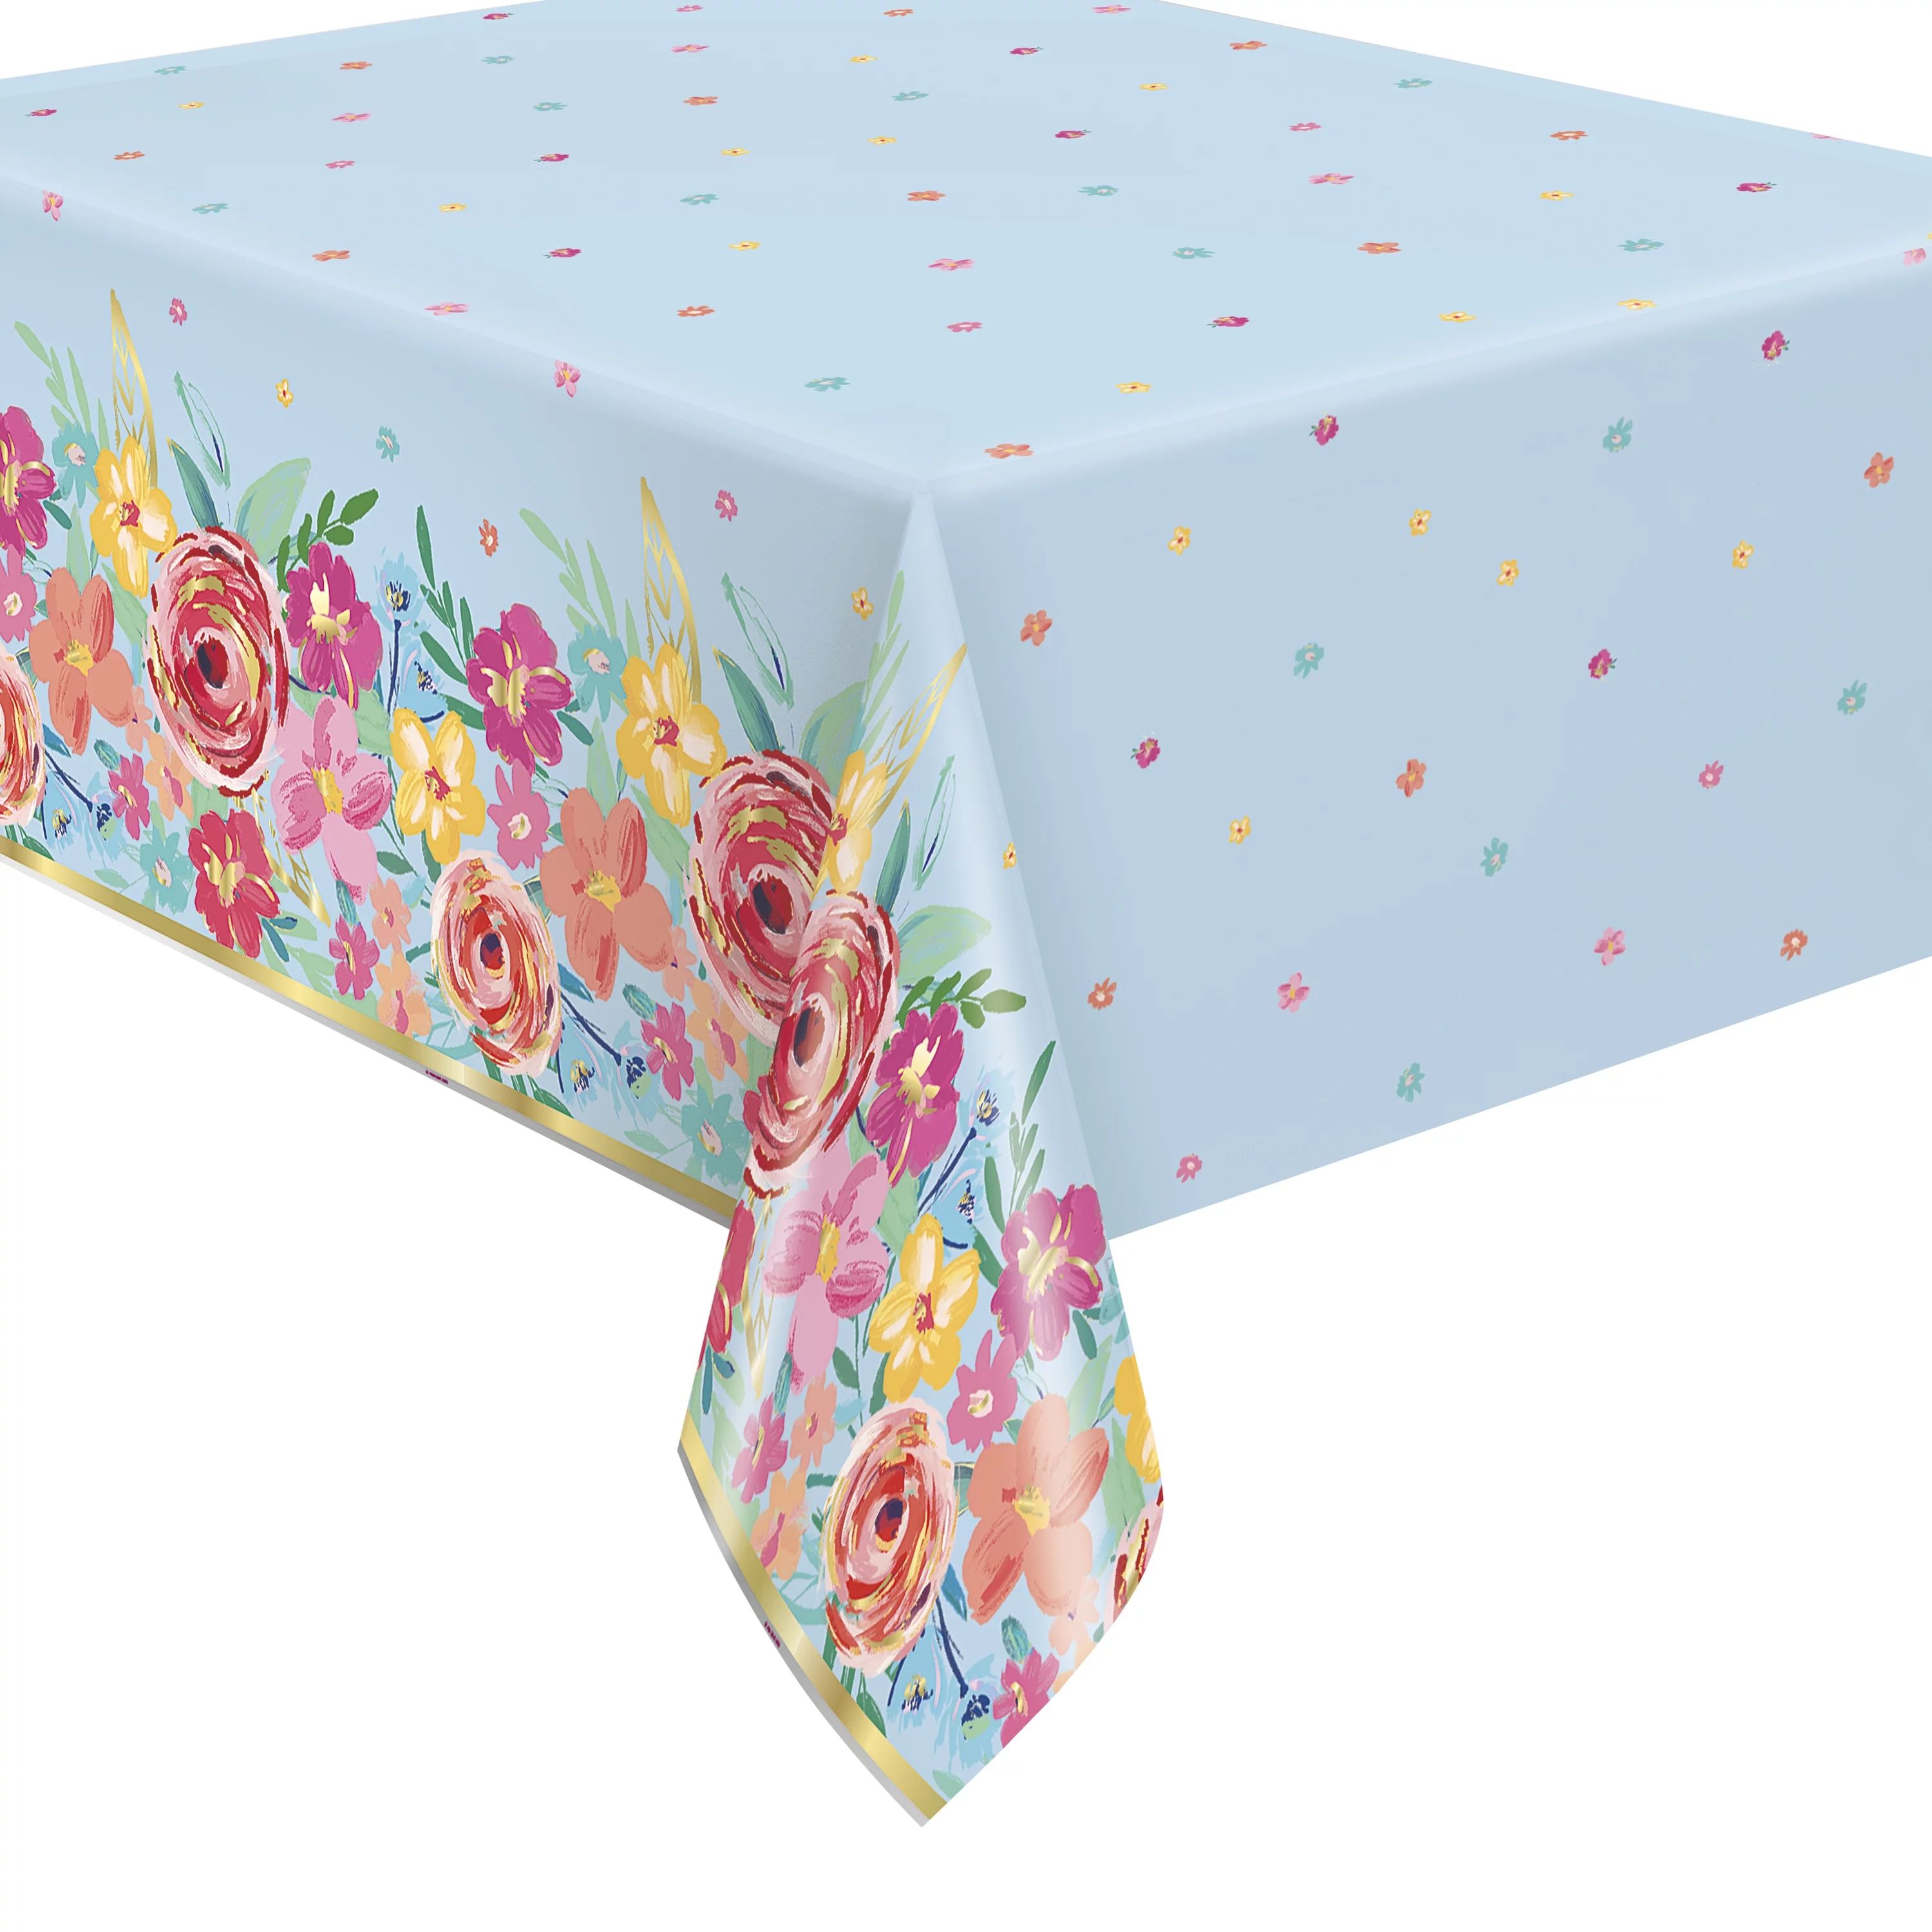 The Pioneer Woman Floral Pink Foil Party Tablecloth, 84in x 54in | Walmart (US)